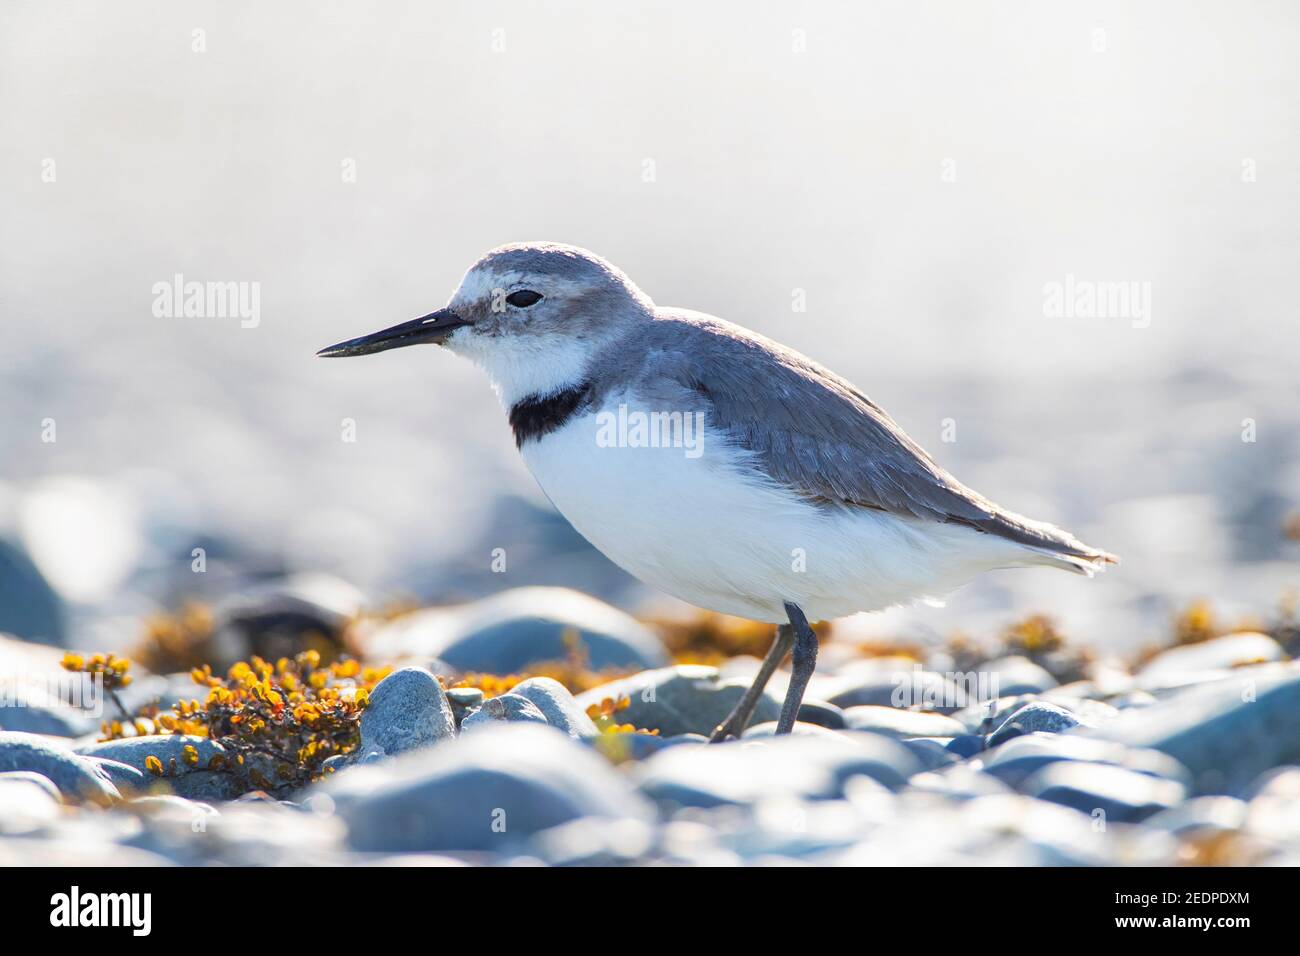 wry-bill, wrybill (Anarhynchus frontalis), adult standing in a river bed, New Zealand, Southern Island, Glentanner Park Stock Photo